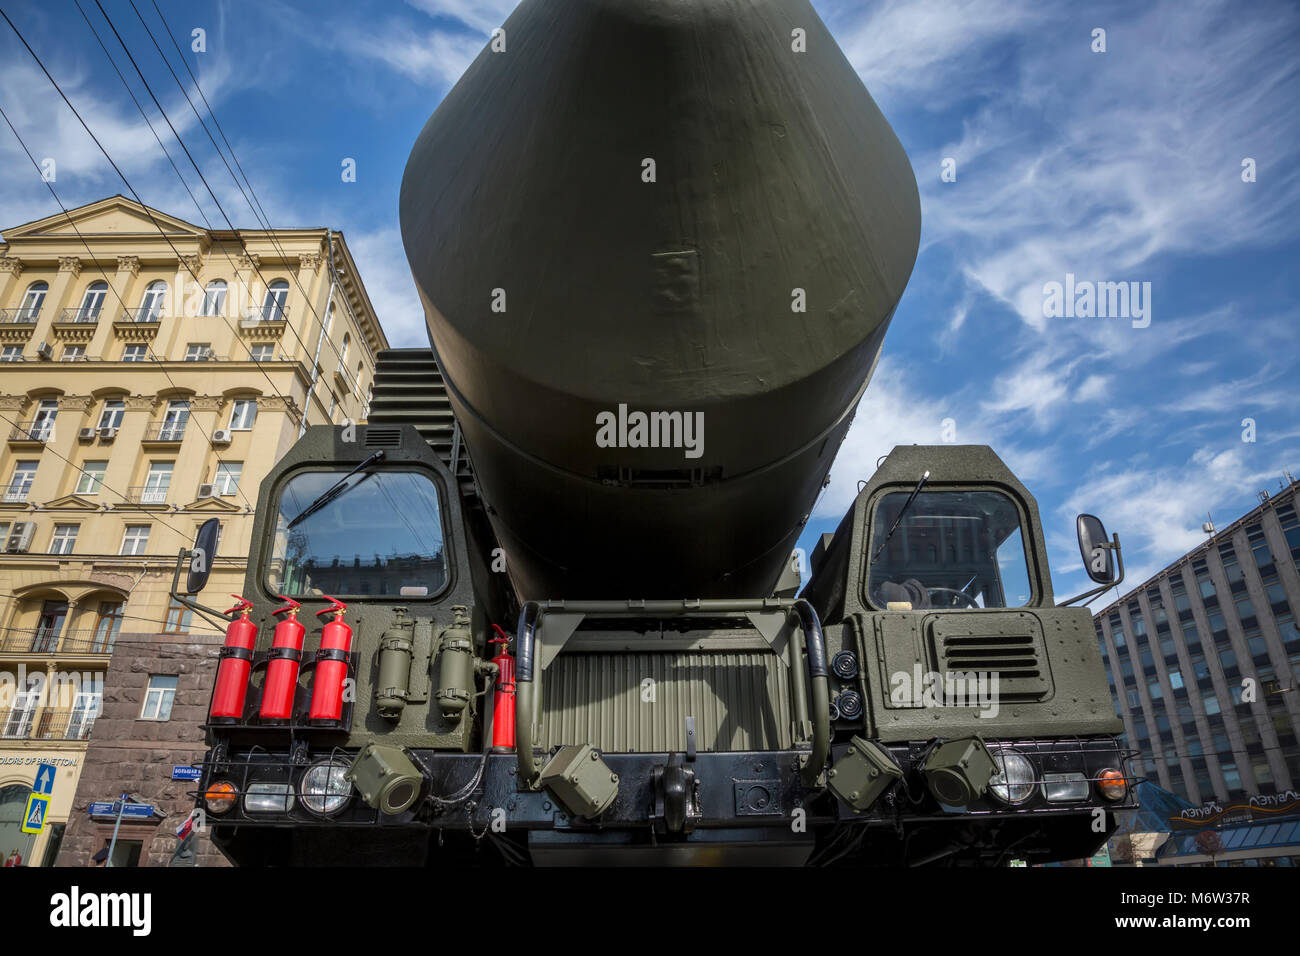 A YARS RS-24 solid propellant inter-continental ballistic missile moves through Moscow's Tverskaya street during a of the May 9 Victory Day Parade Stock Photo